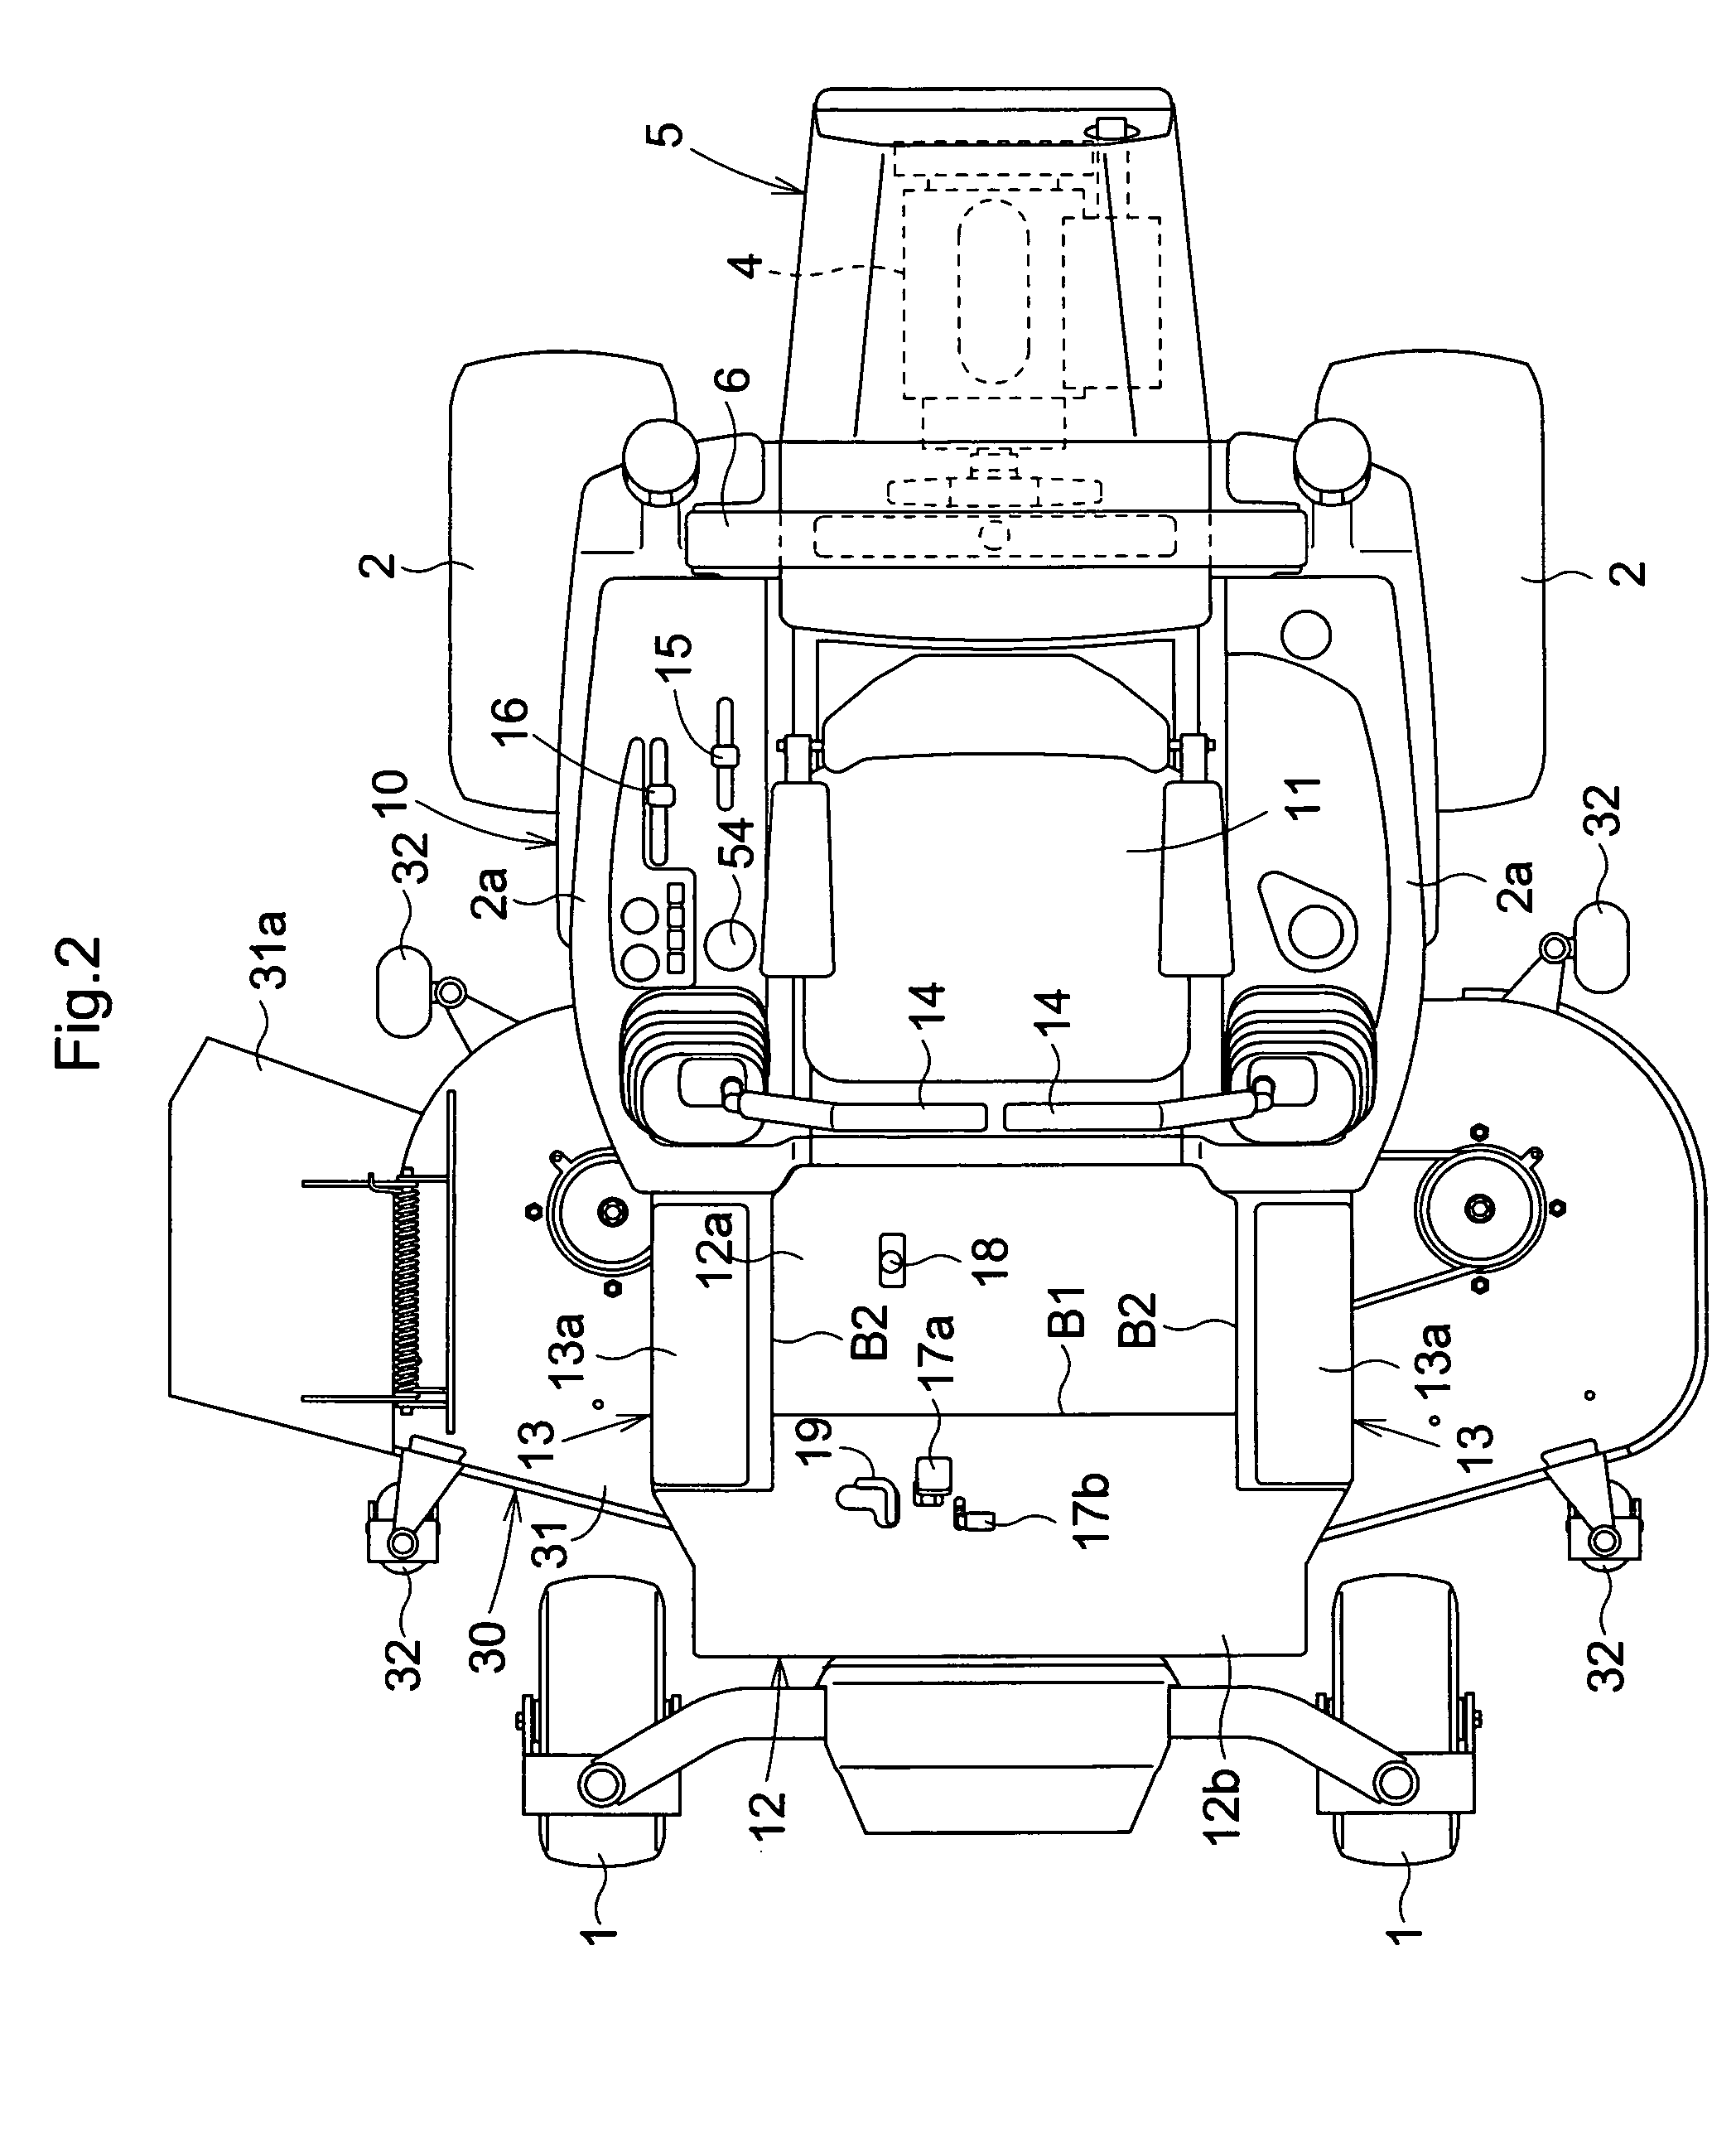 Lower limit adjustment mechanism for riding type mower